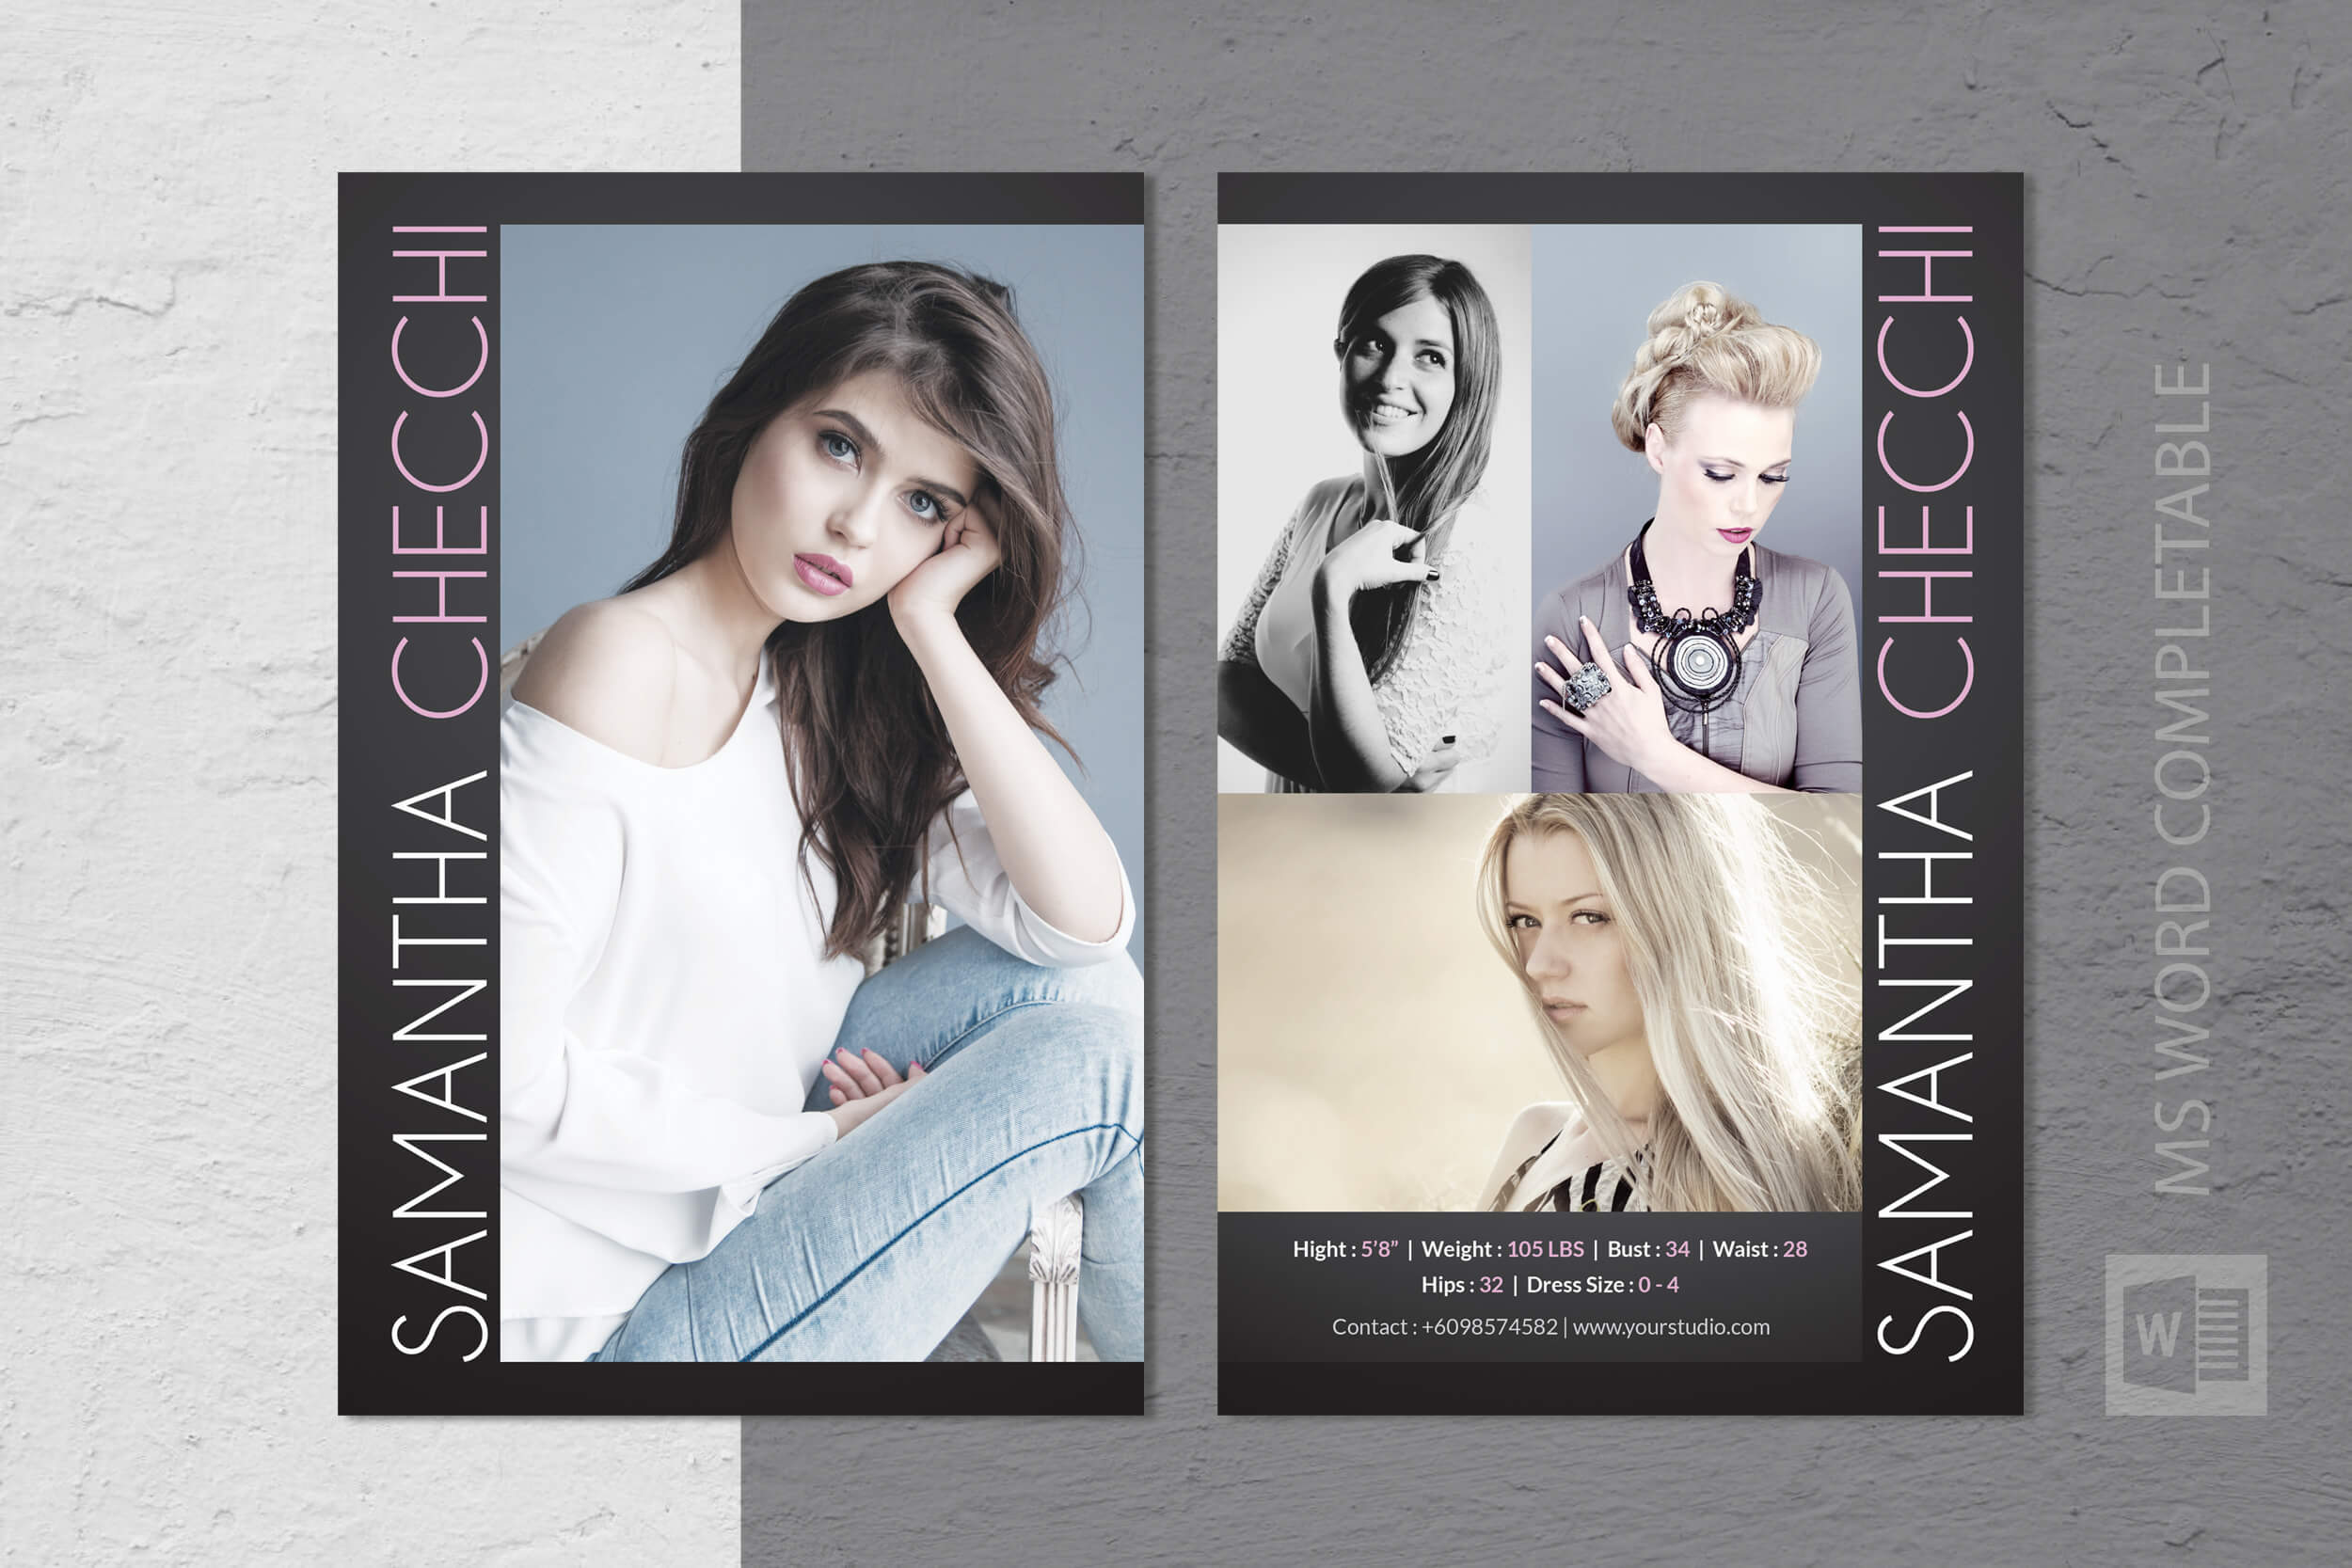 021 Template Ideas Model Comp Outstanding Card Download Free Regarding Download Comp Card Template